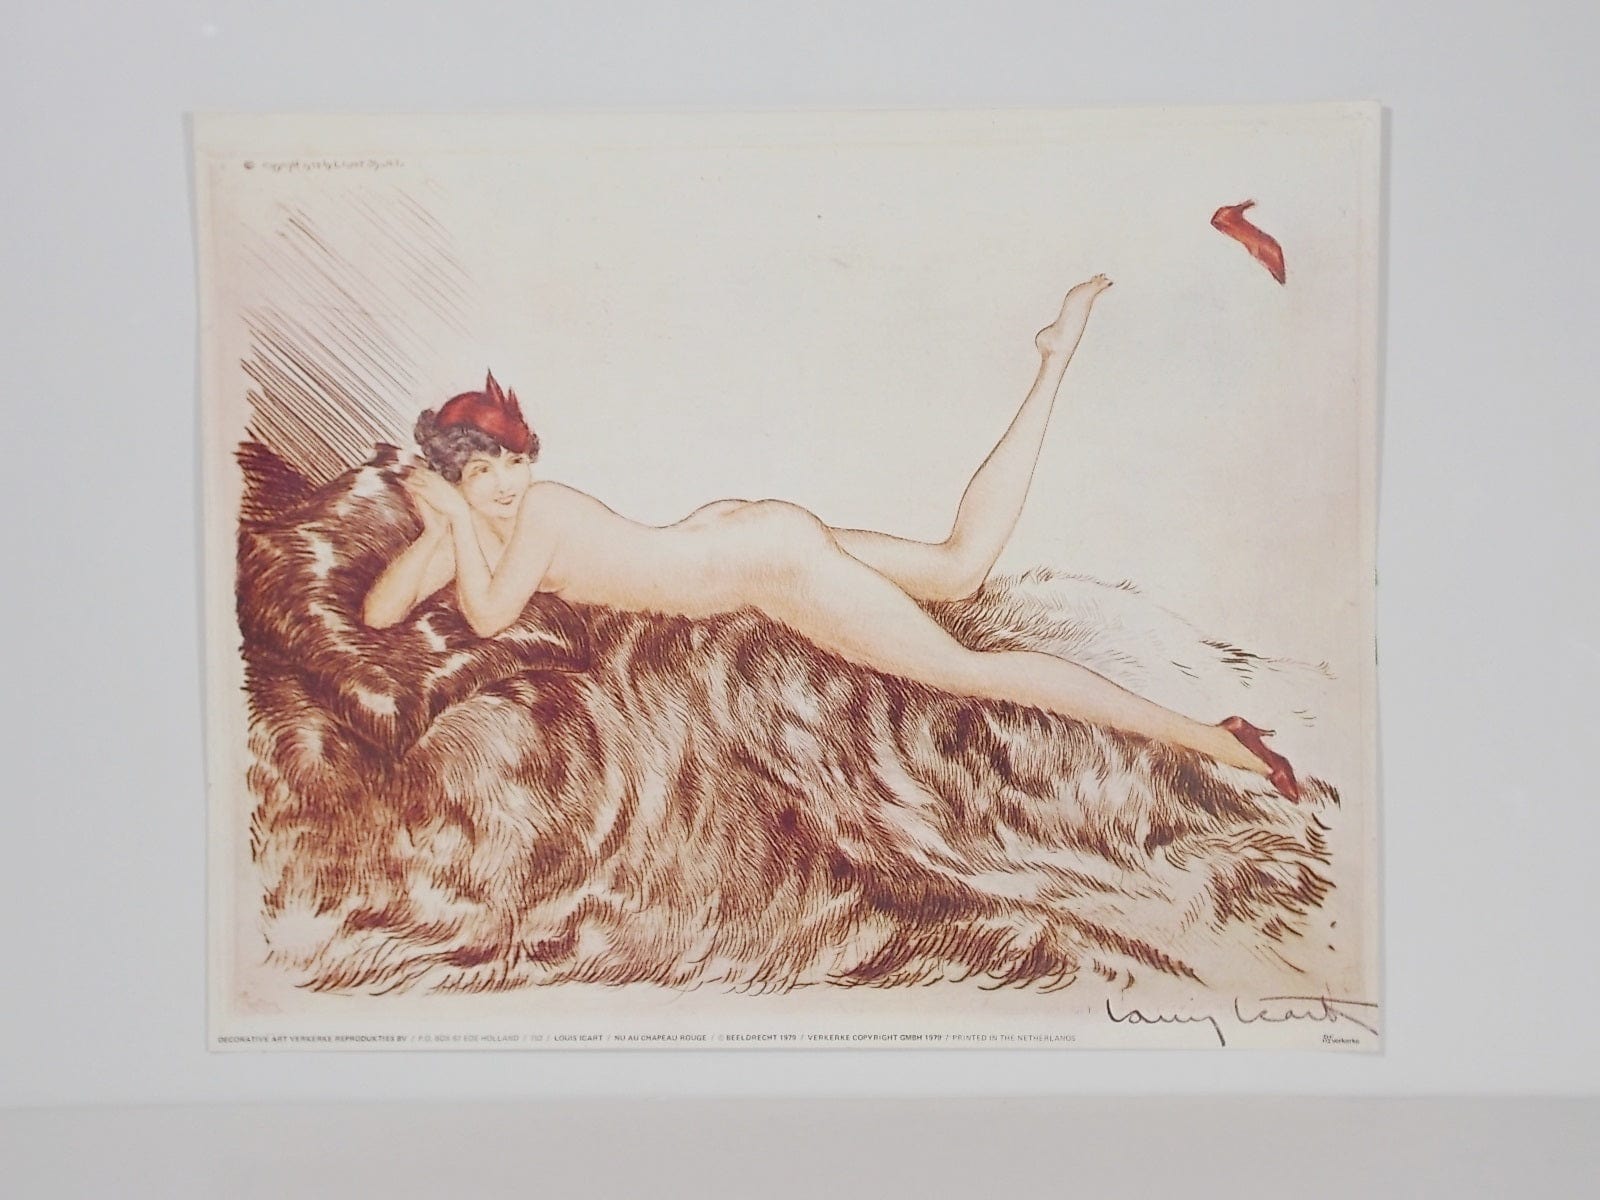 I Like Mike's Mid Century Modern Wall Decor & Art Louis Icart Print "Nu au Chapeau Rouge" (Nude with Red Hat) Art Deco, Reprint from 1979, Unframed